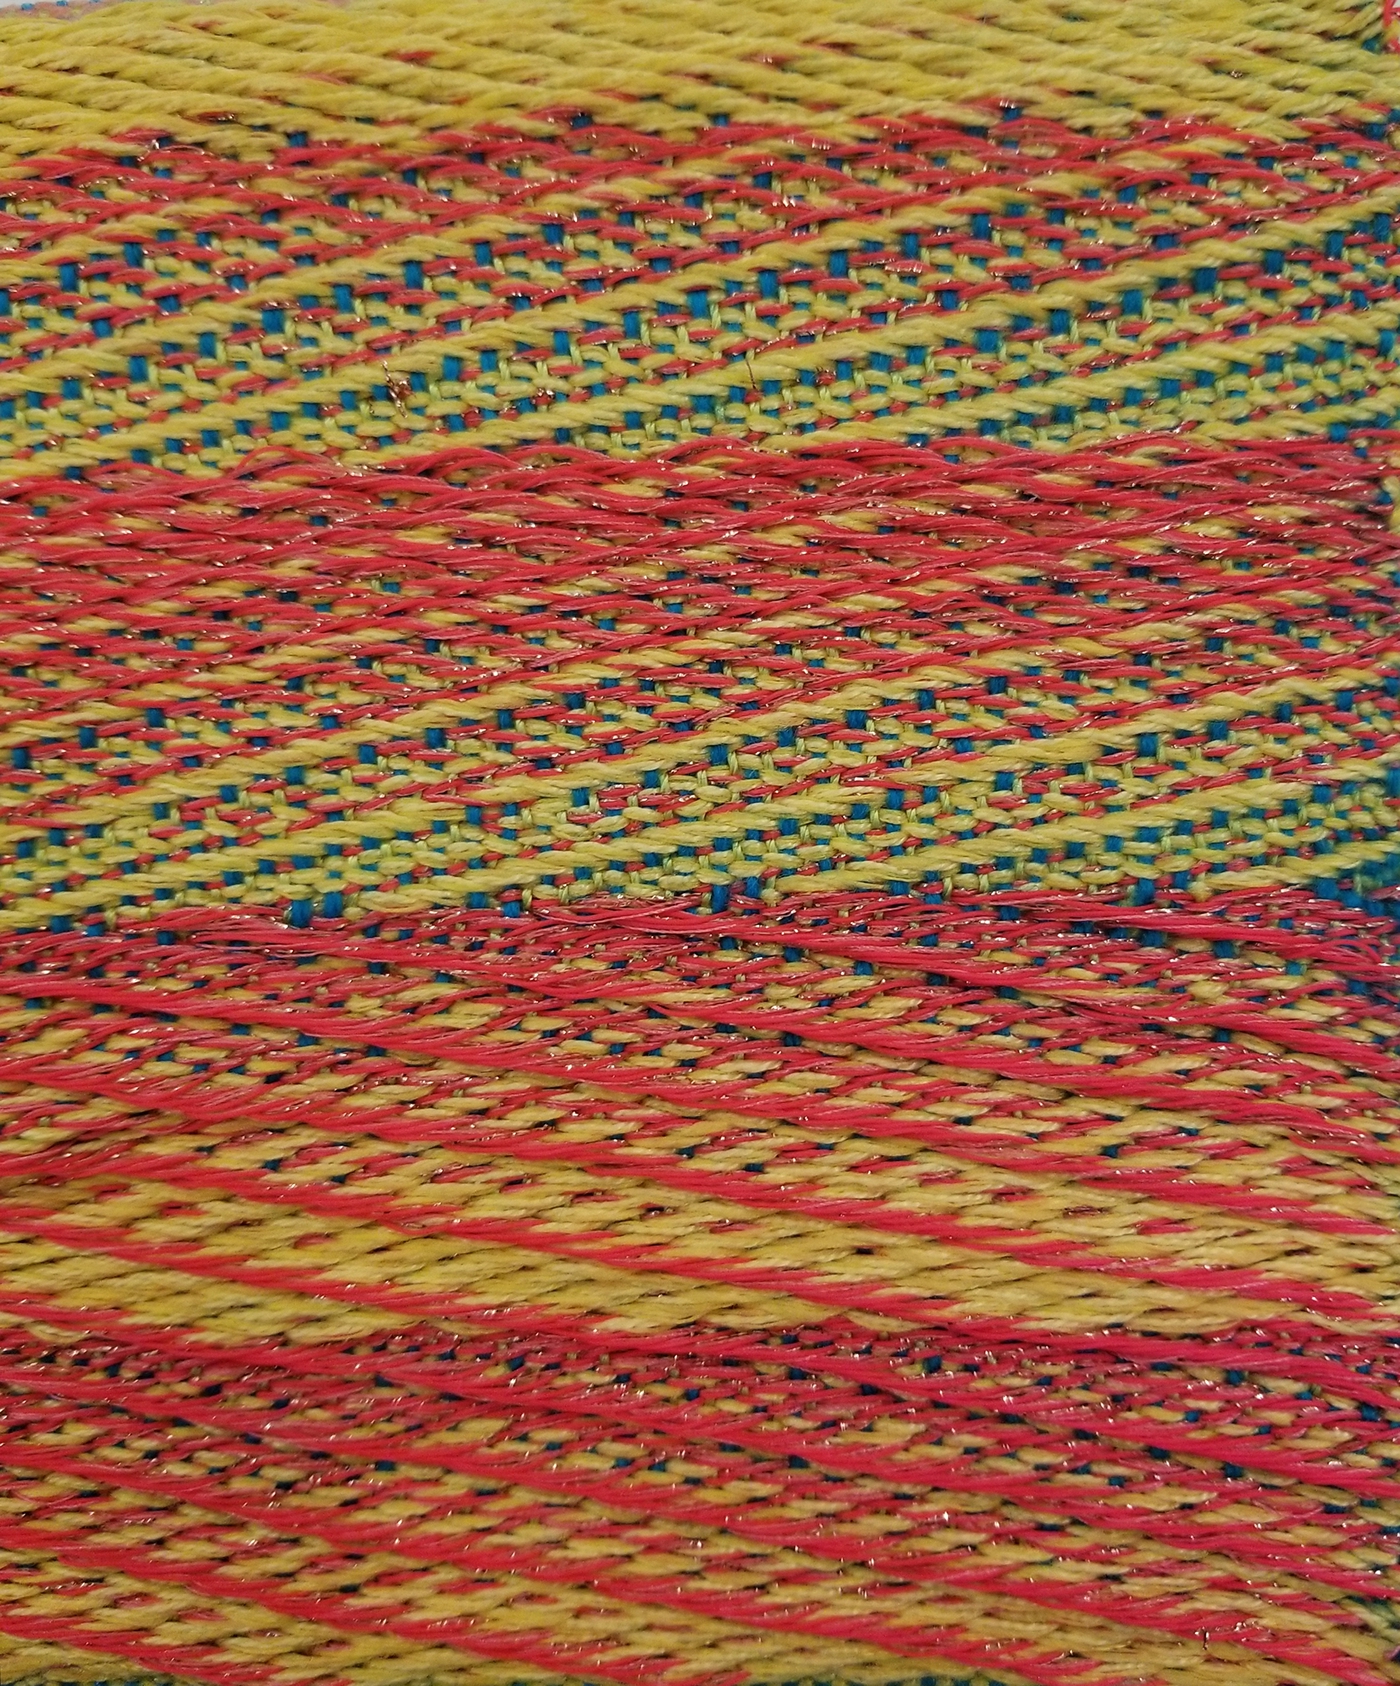 Textiles dobby weaving experimental colorful textures Patterns apparel interior design  fine art